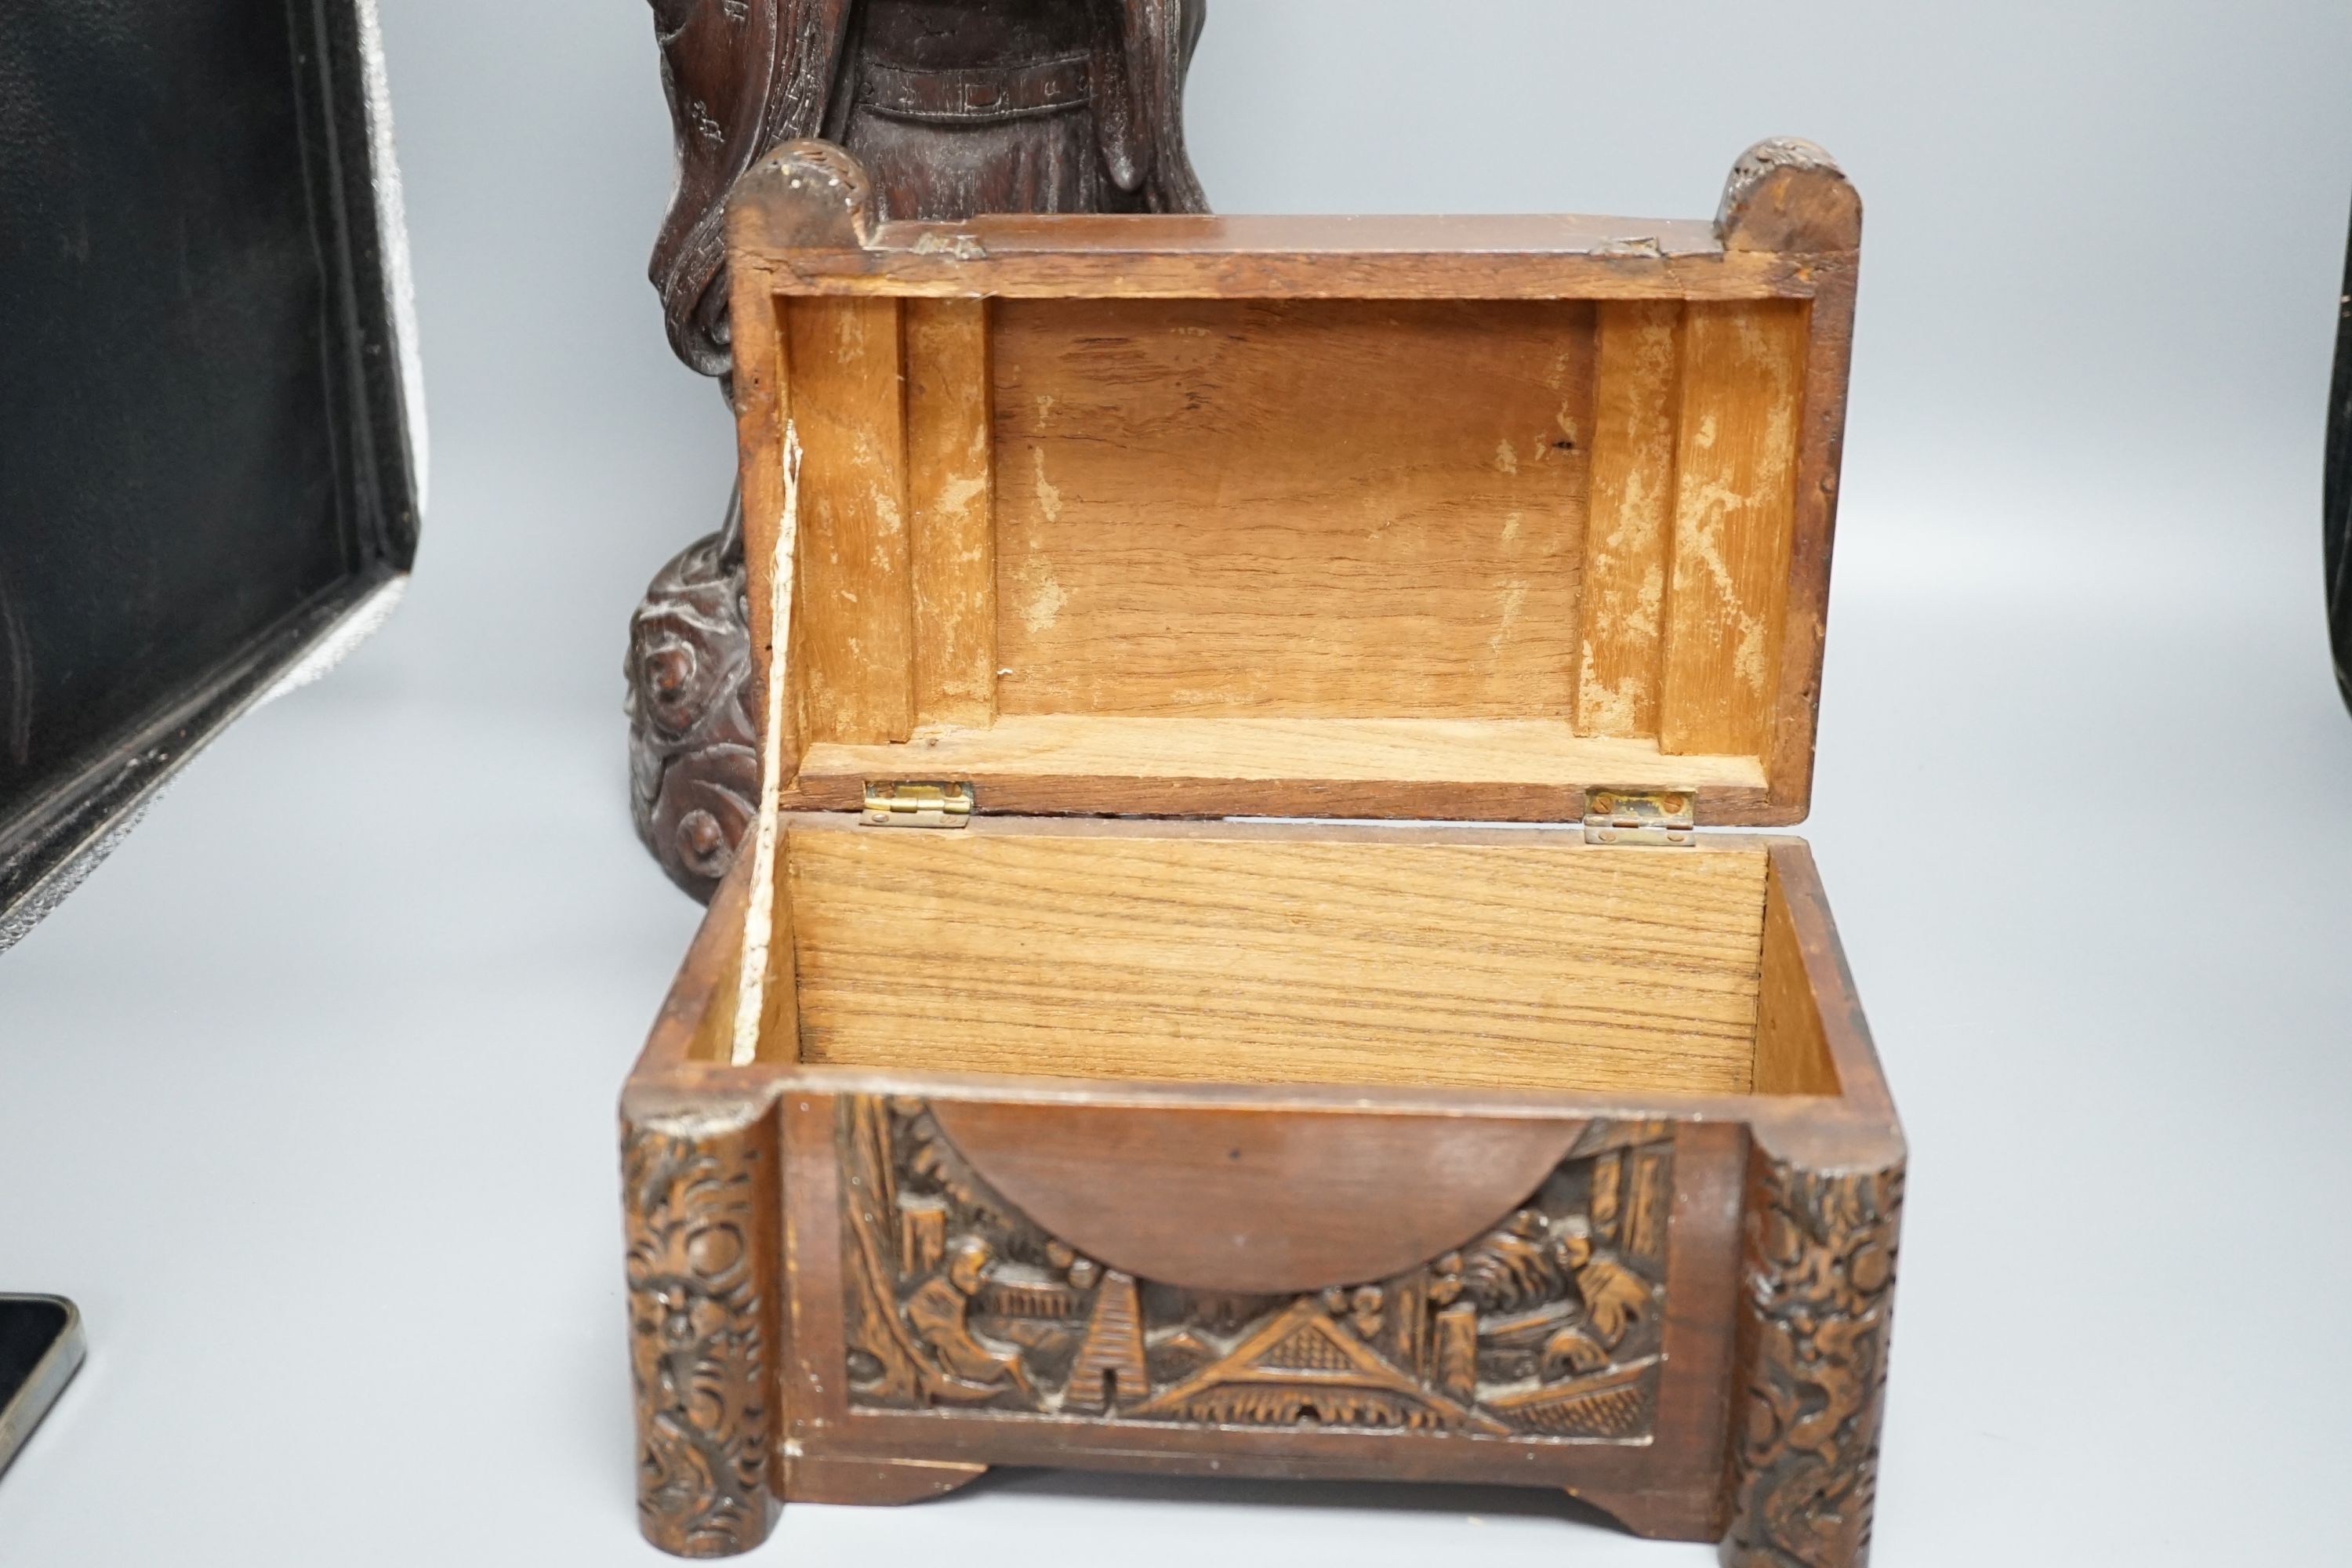 A Chinese carved wood sage and small carved trunk, Sage 47 cms high.